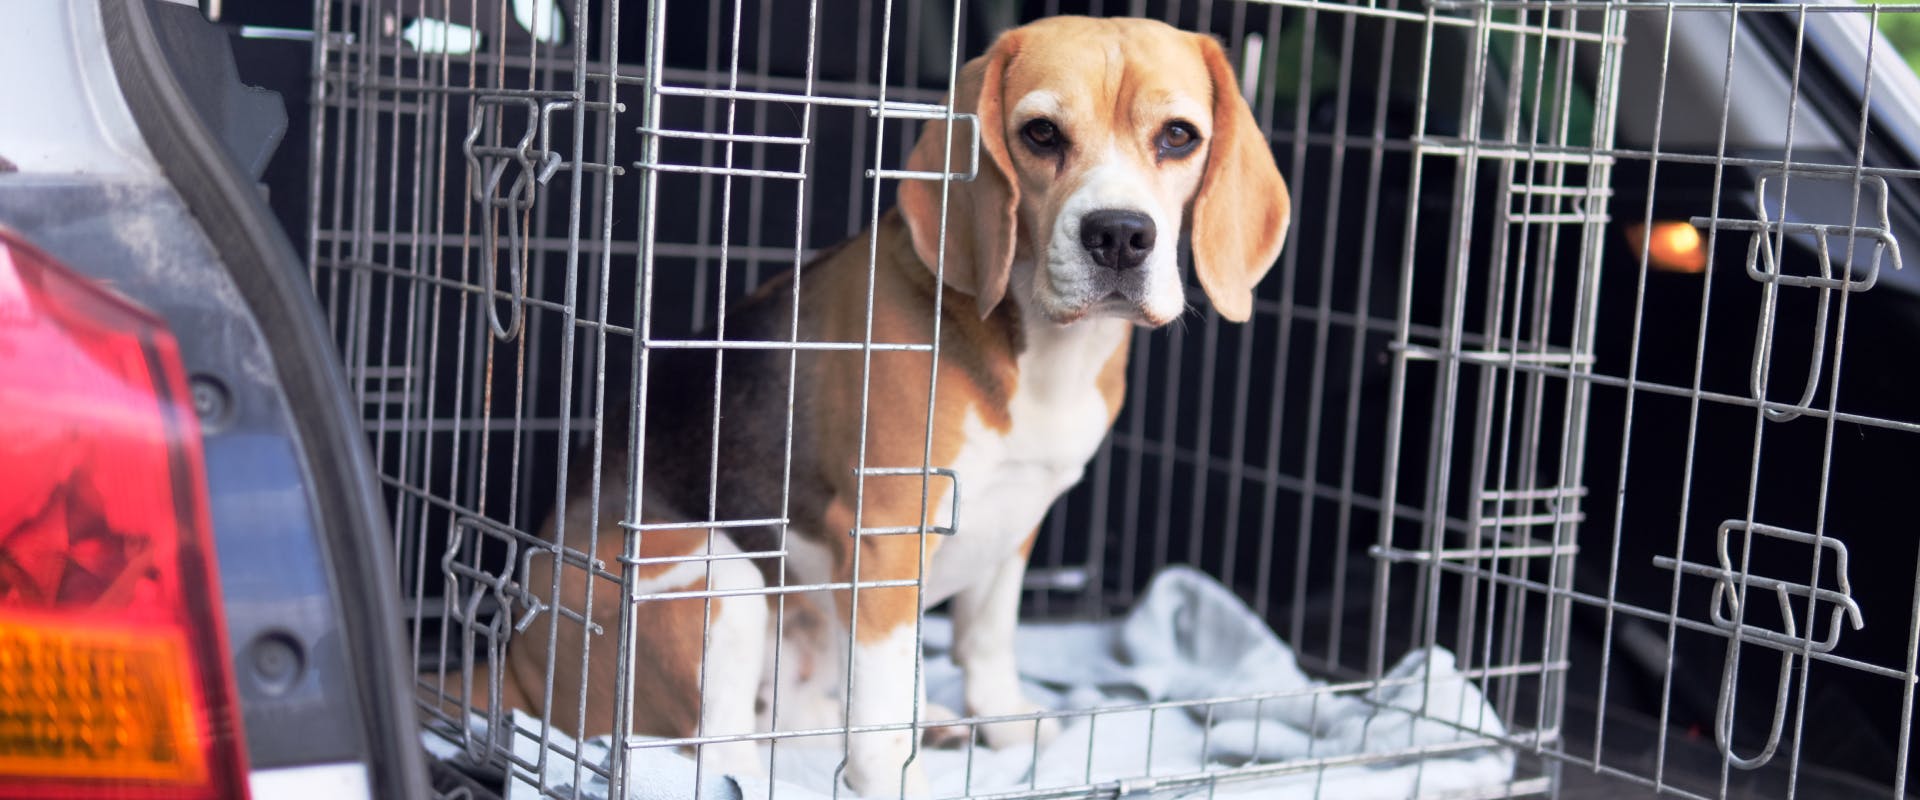 a beagle in a metal travel dog kennel in the boot of a car